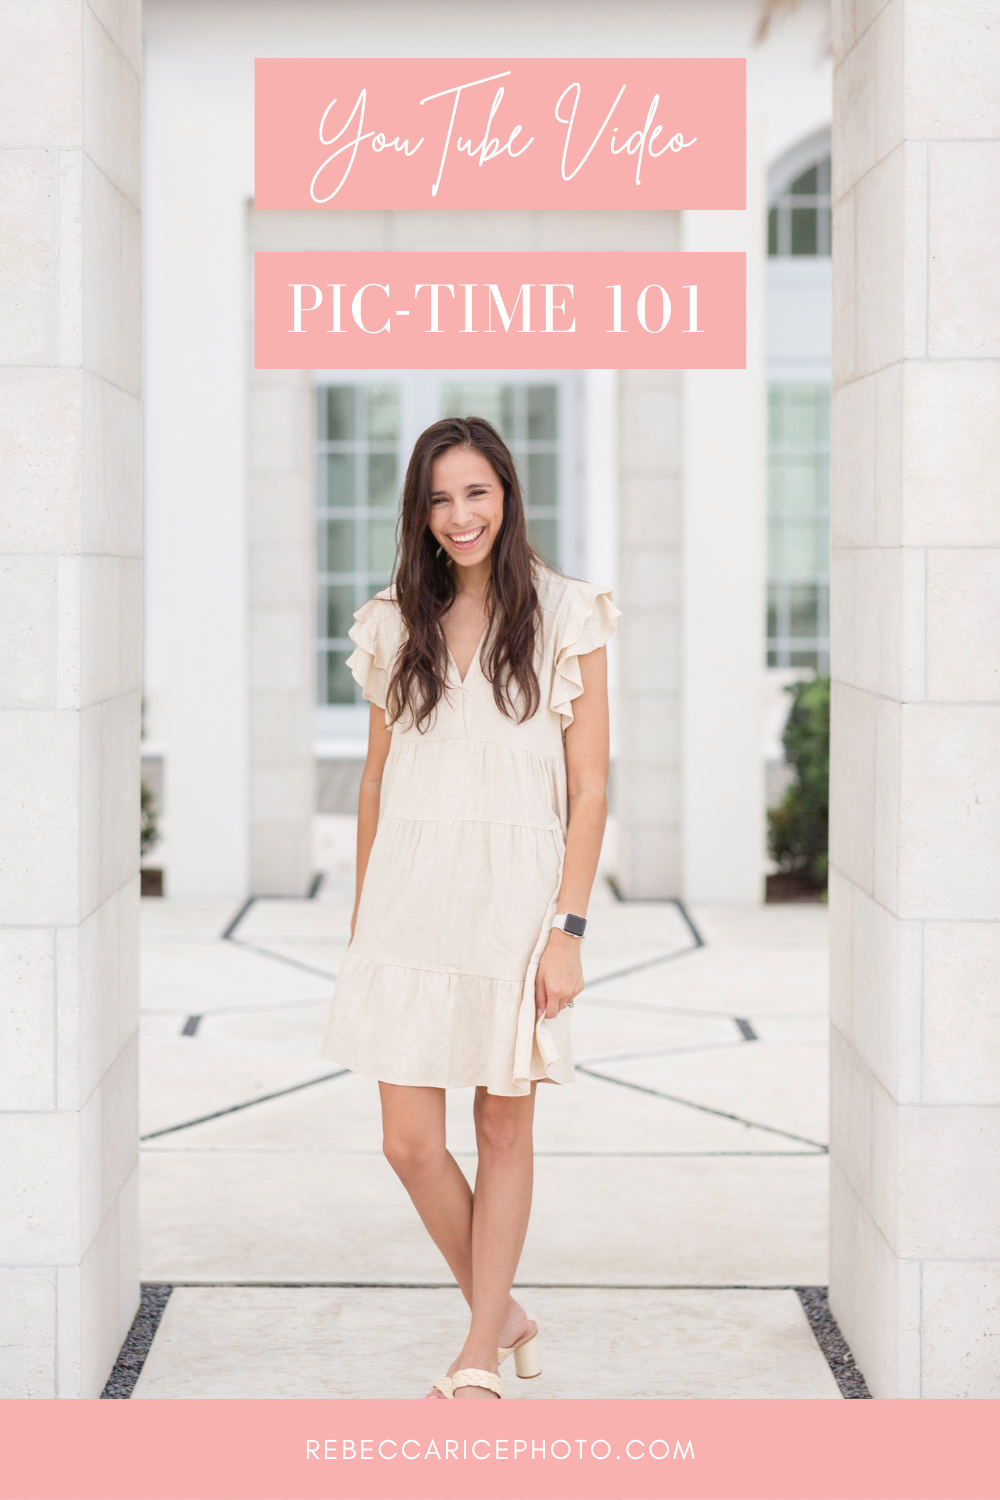 PicTime 101 | Pic-Time Tutorial